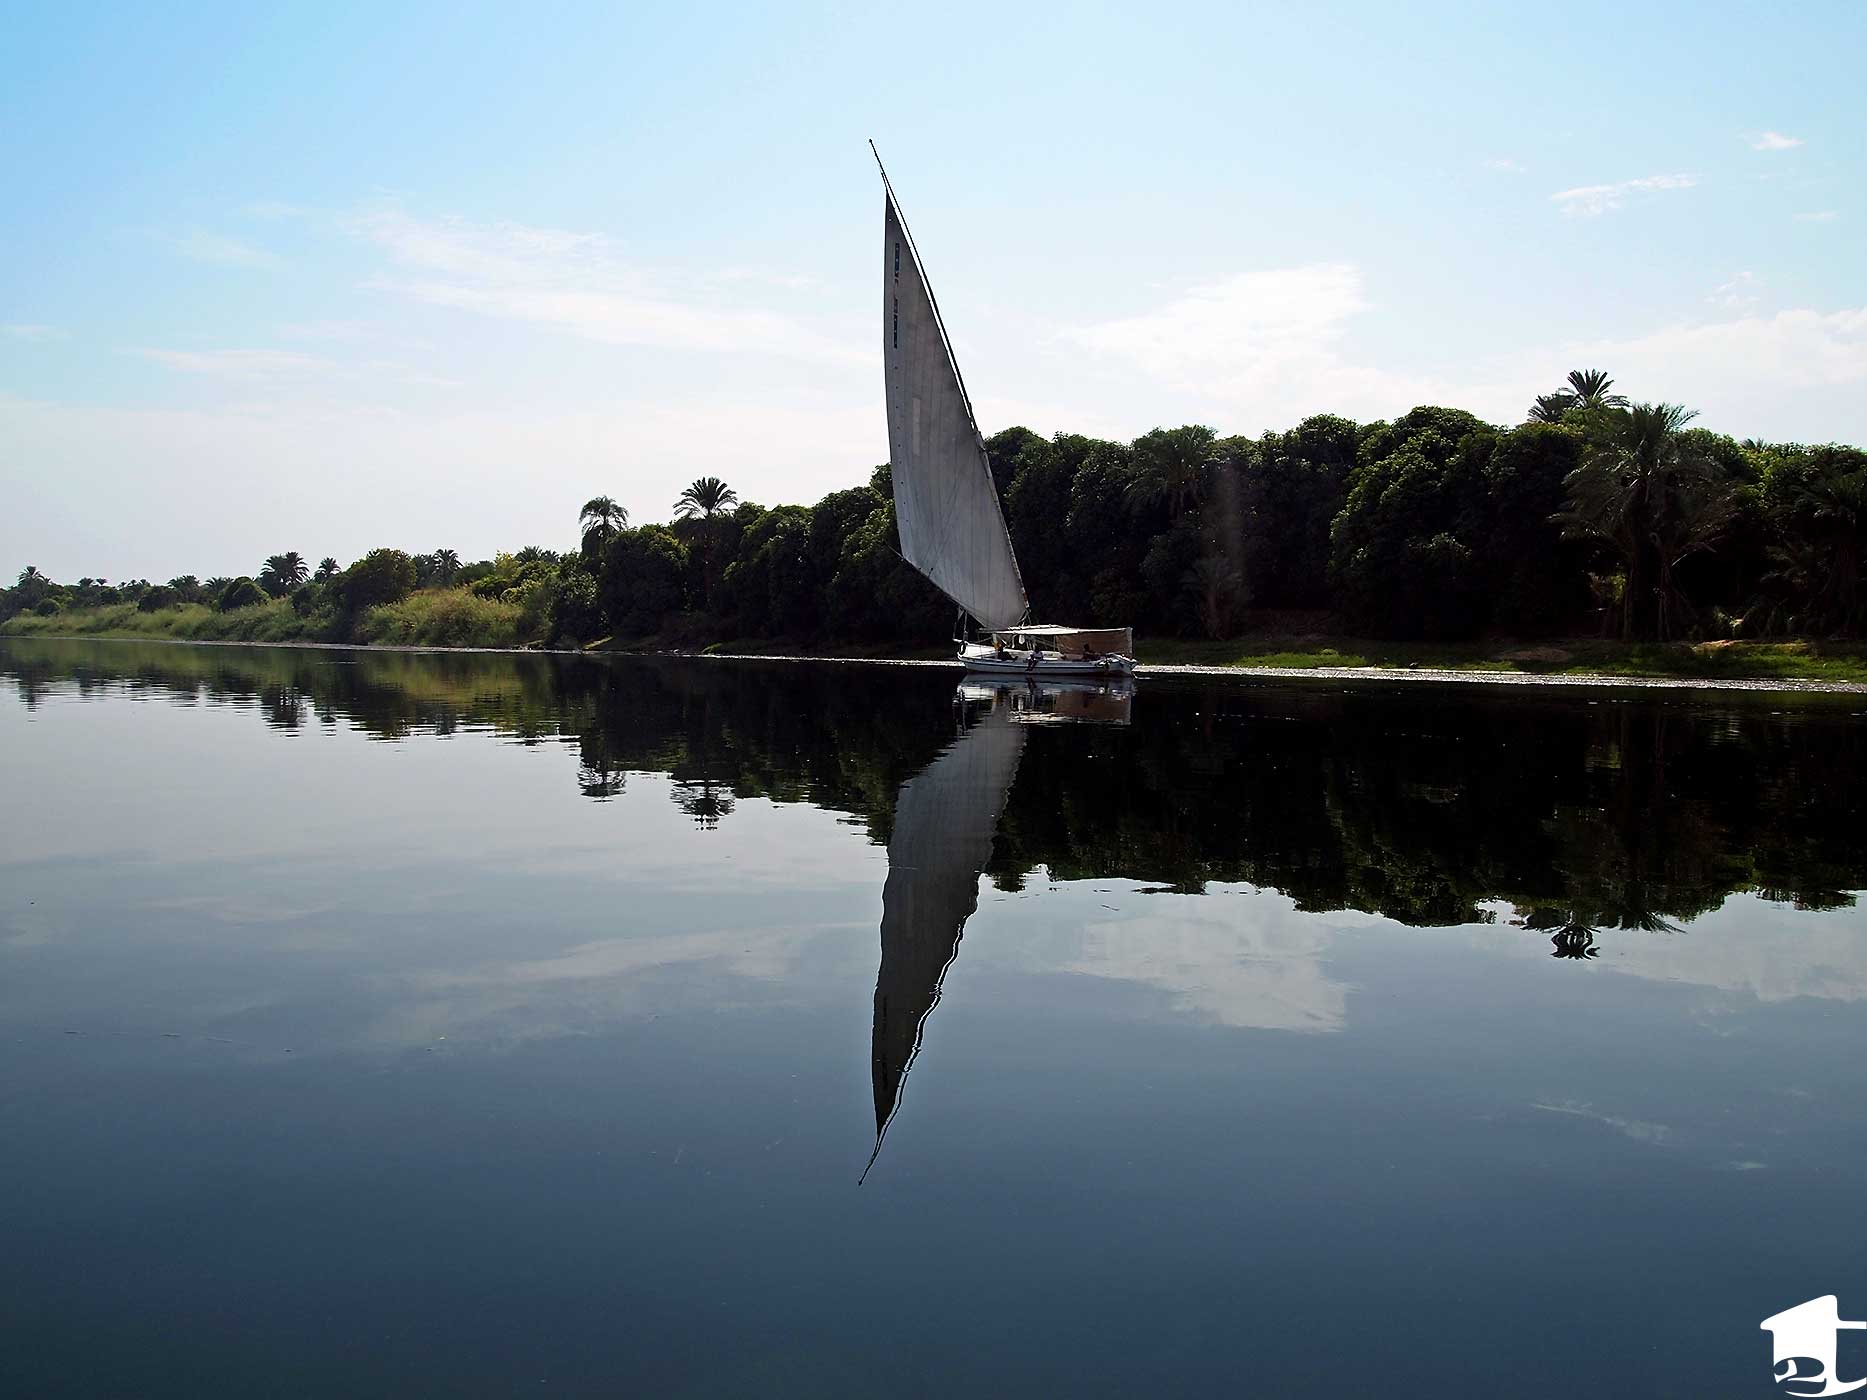 A felucca on the Nile